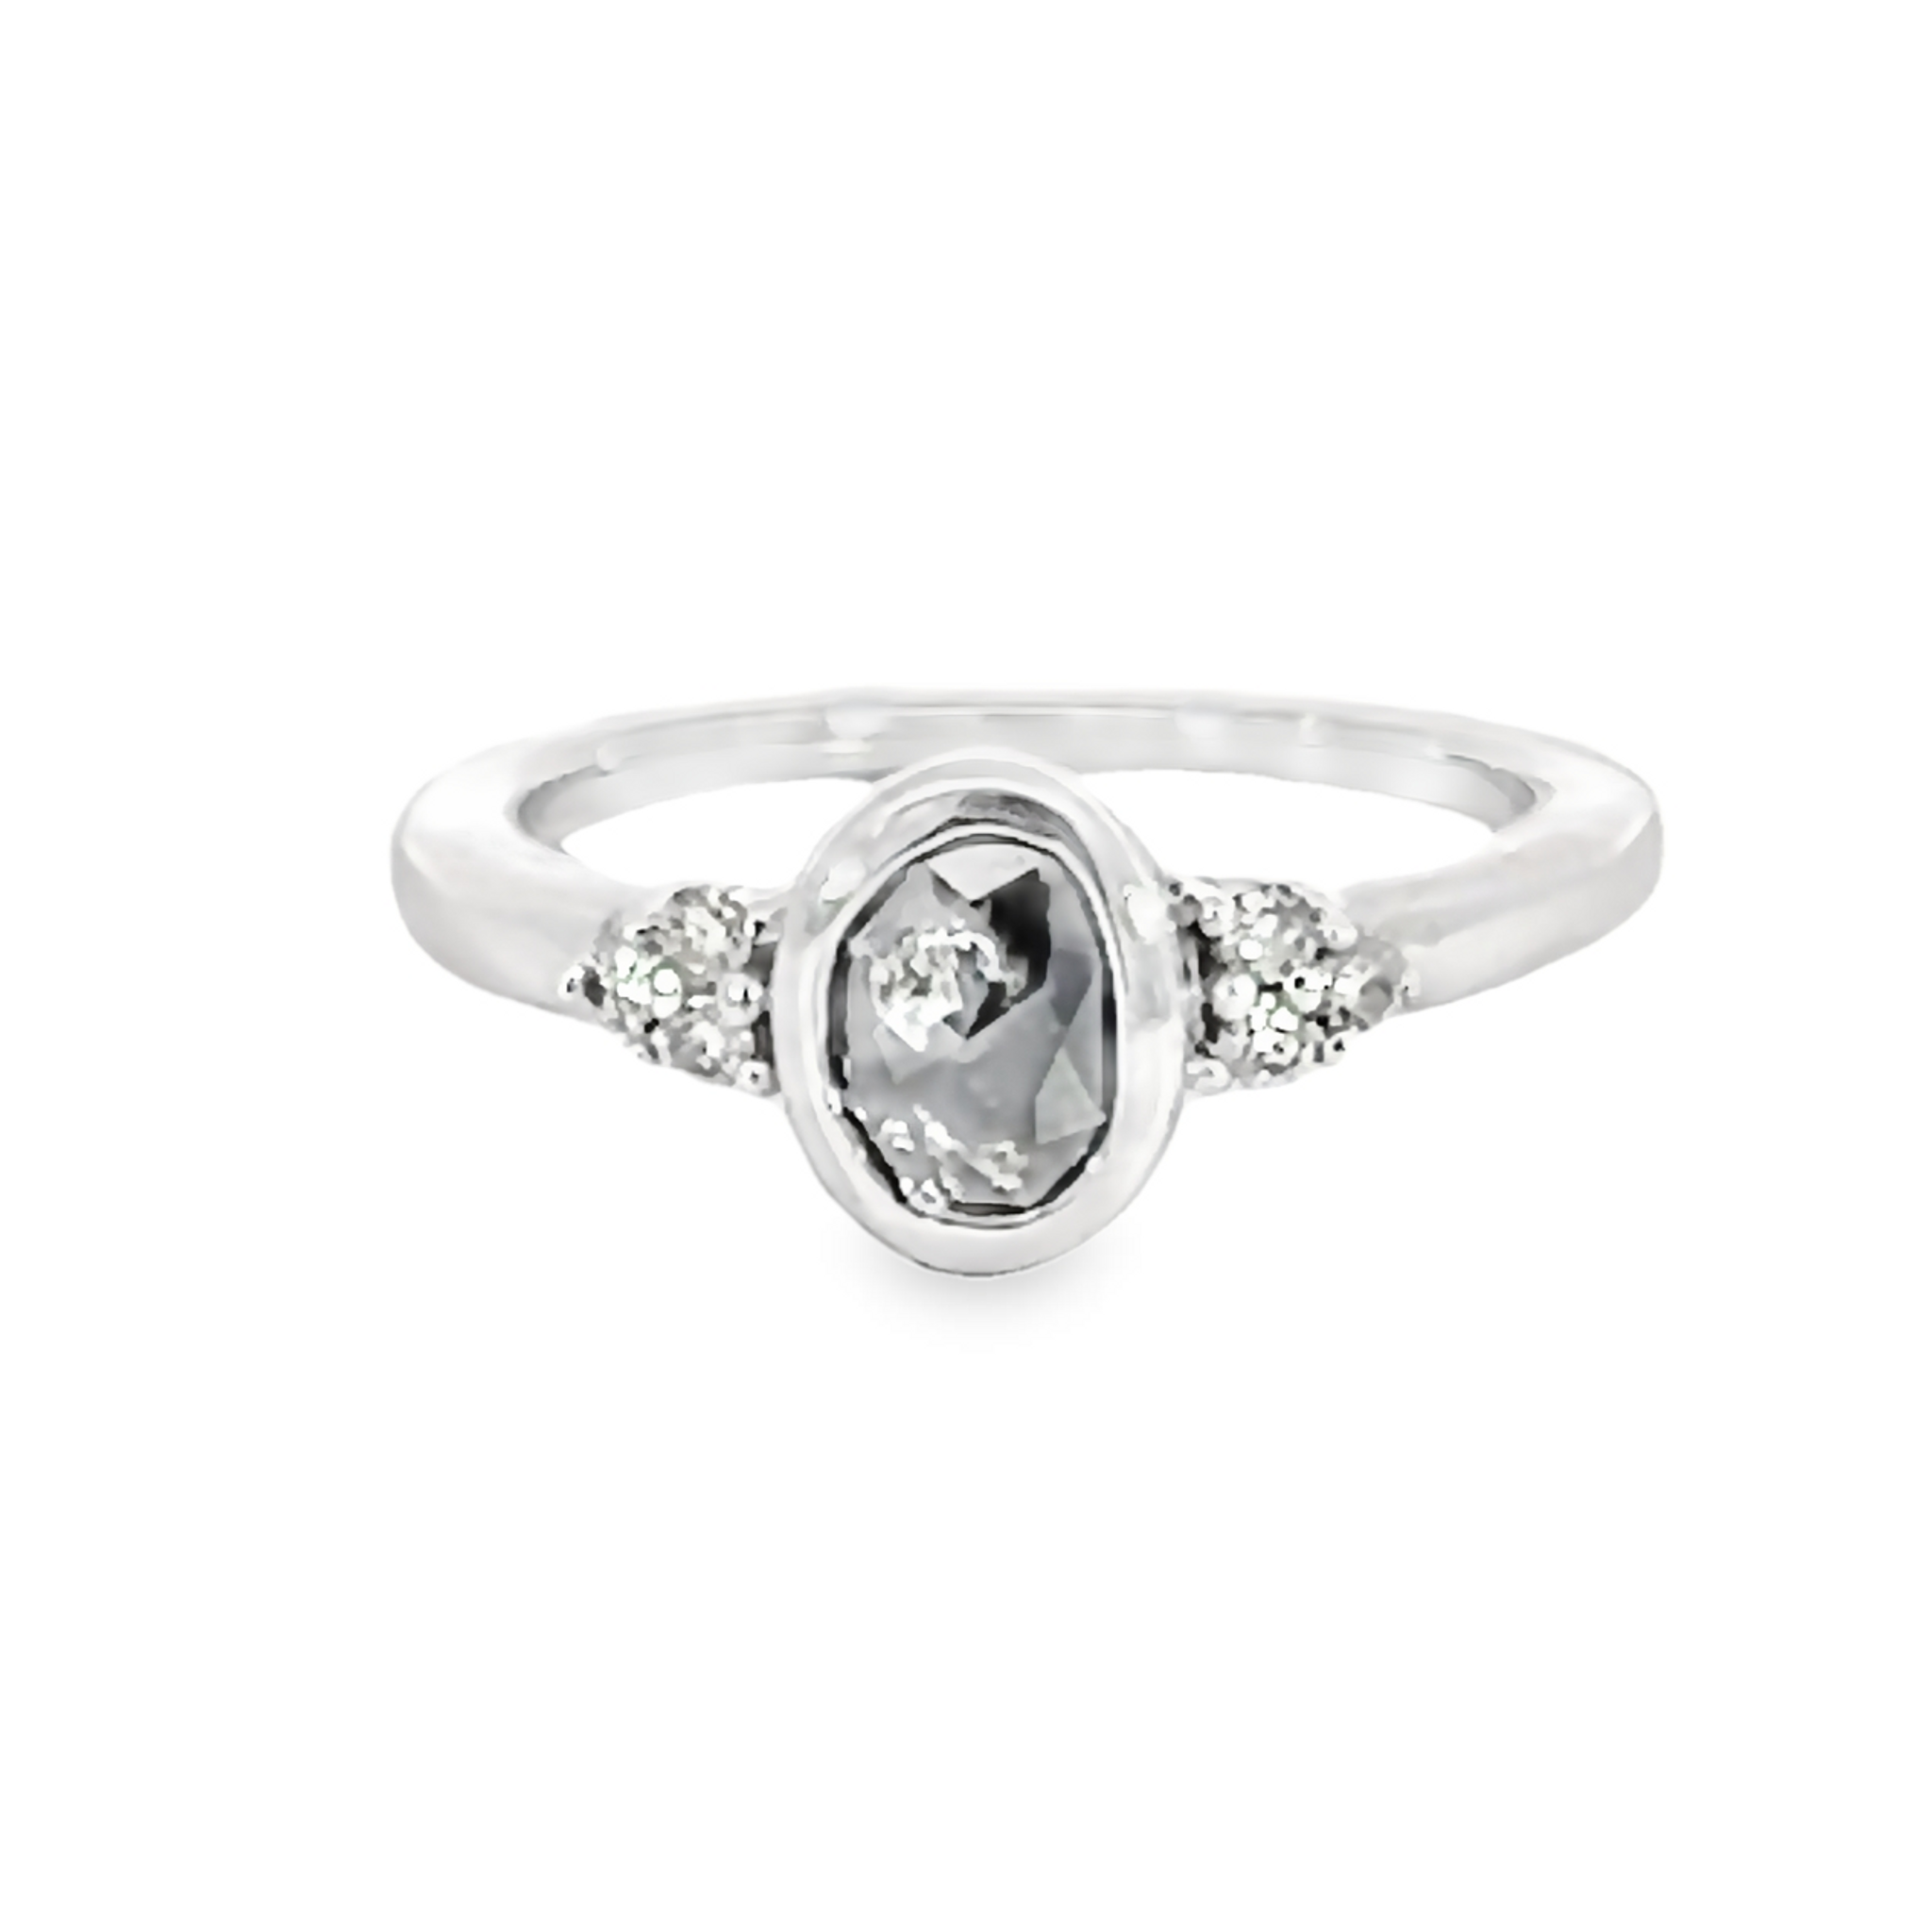 Salt & Pepper Oval Diamond Engagement Ring With Bezel And Side Accents